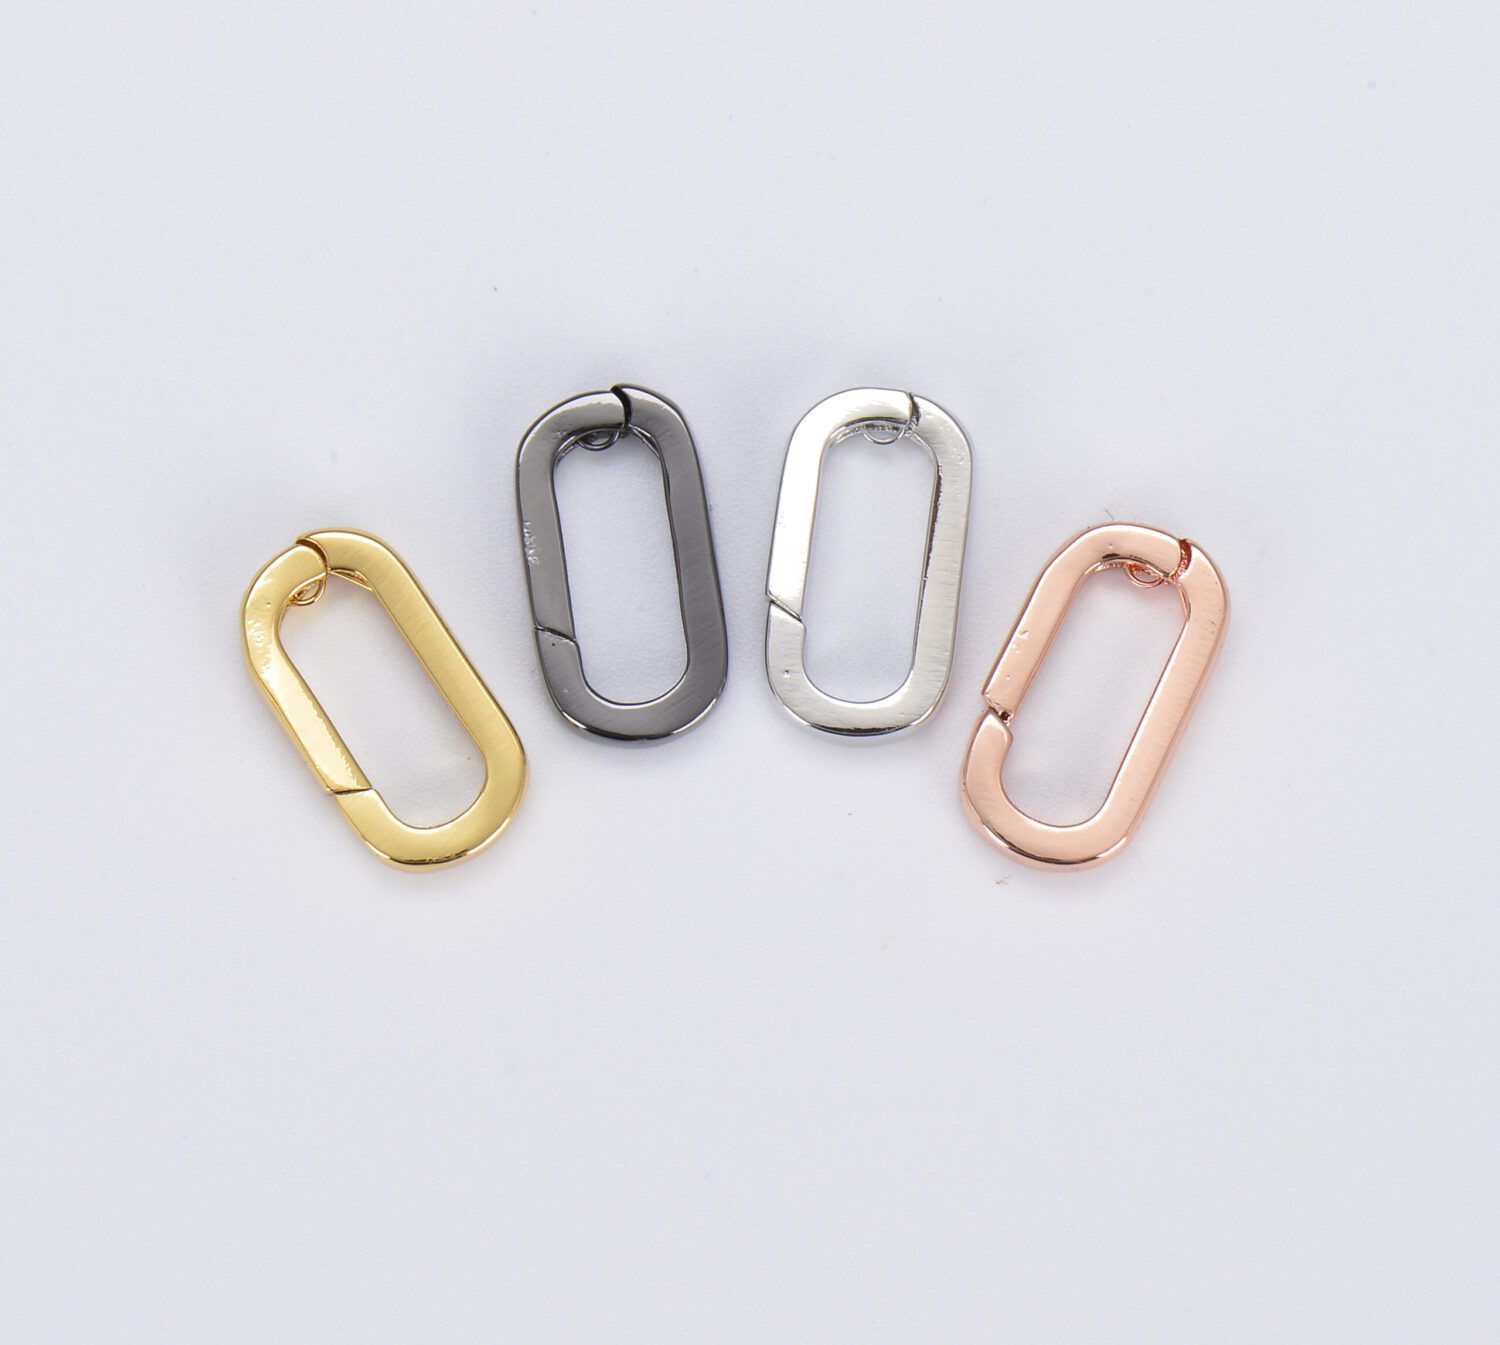 Push in Gate Lock Oval Jewelry Clasp Gold Silver Black Rose Gold Push Gate  Clasp, Spring